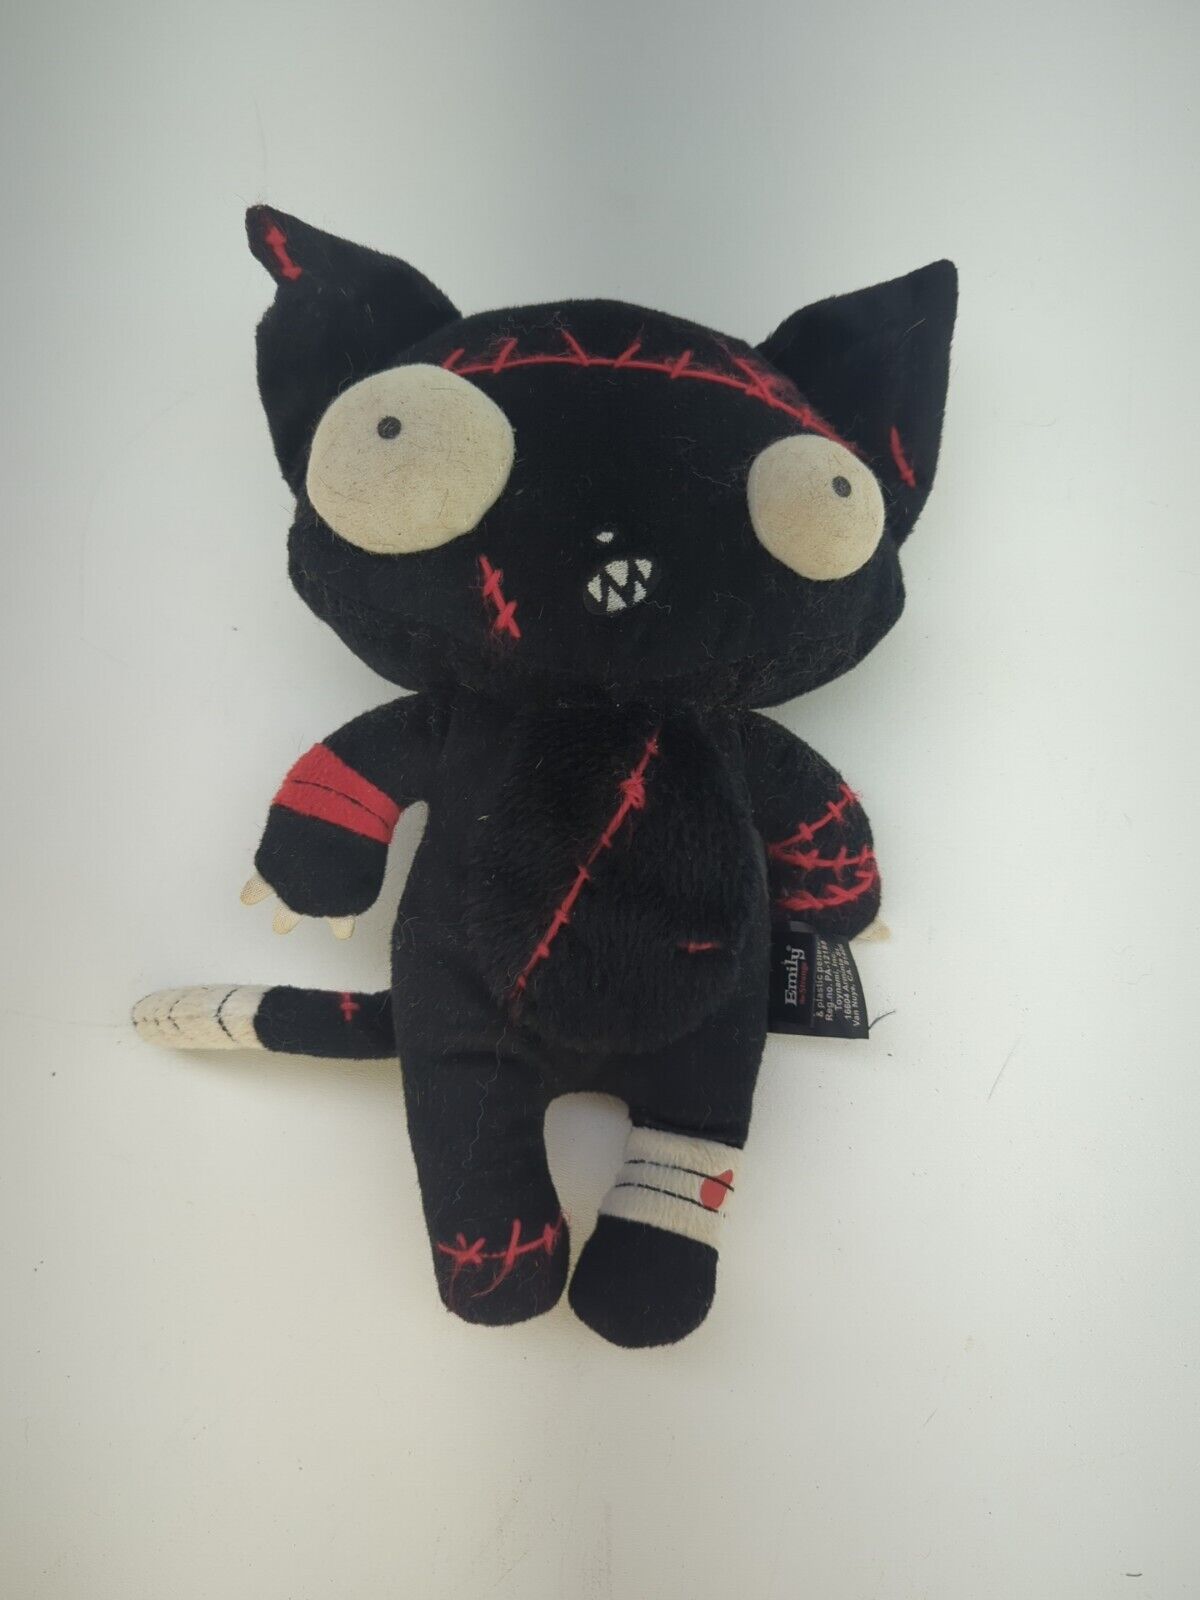 Emily The Strange Plush 2007 Zombie Kitty Doll Back In Black 1 Of 1000 Produced.